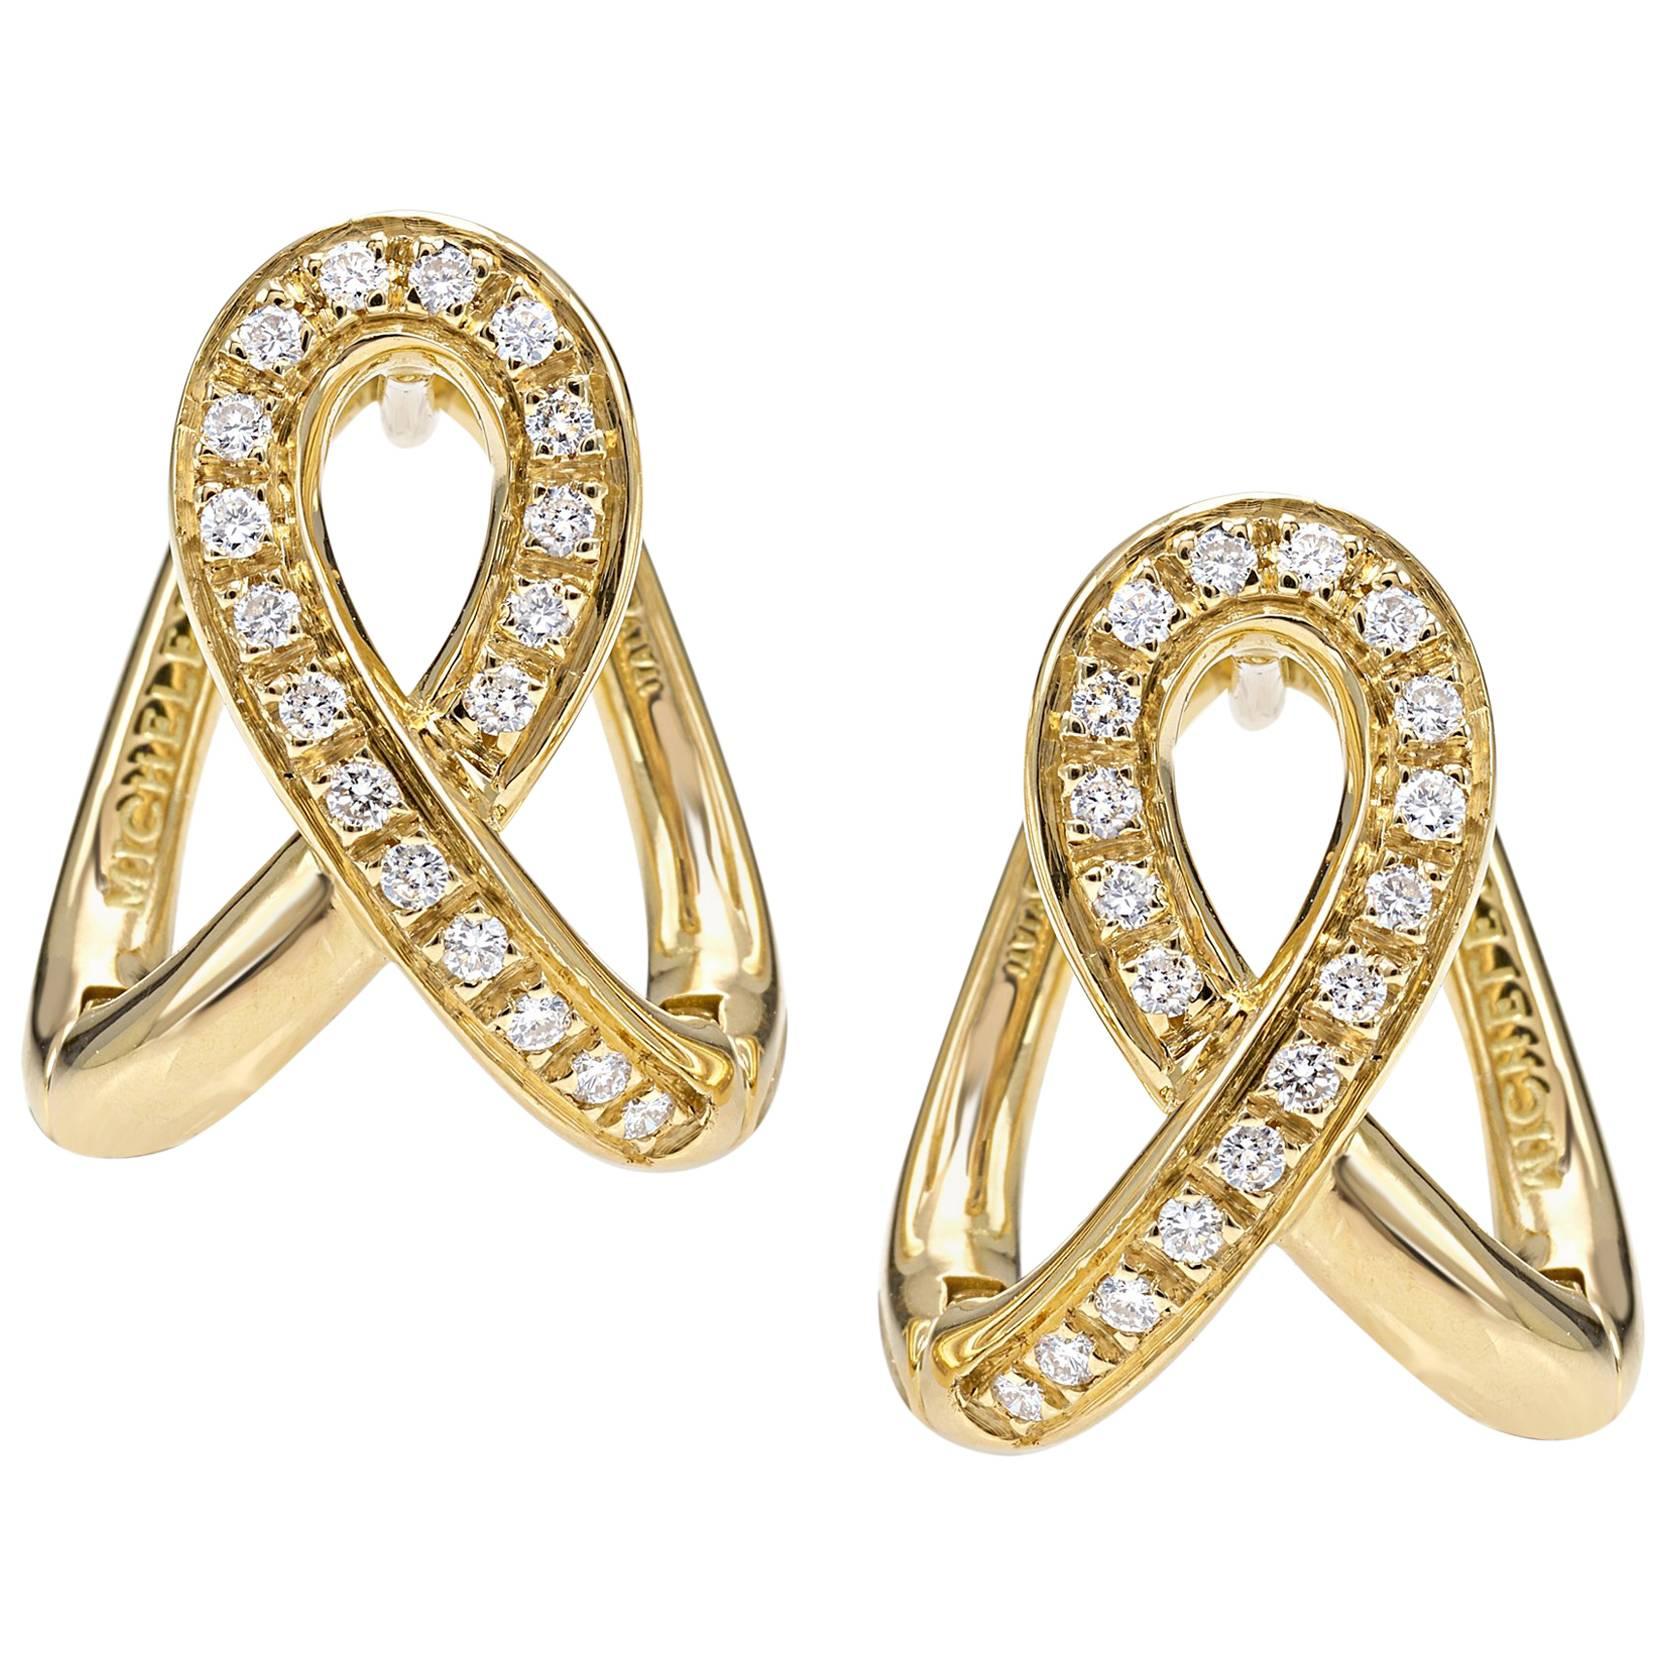 Earrings from the Collection "Essence" 18 Karat Yellow Gold and Diamonds For Sale